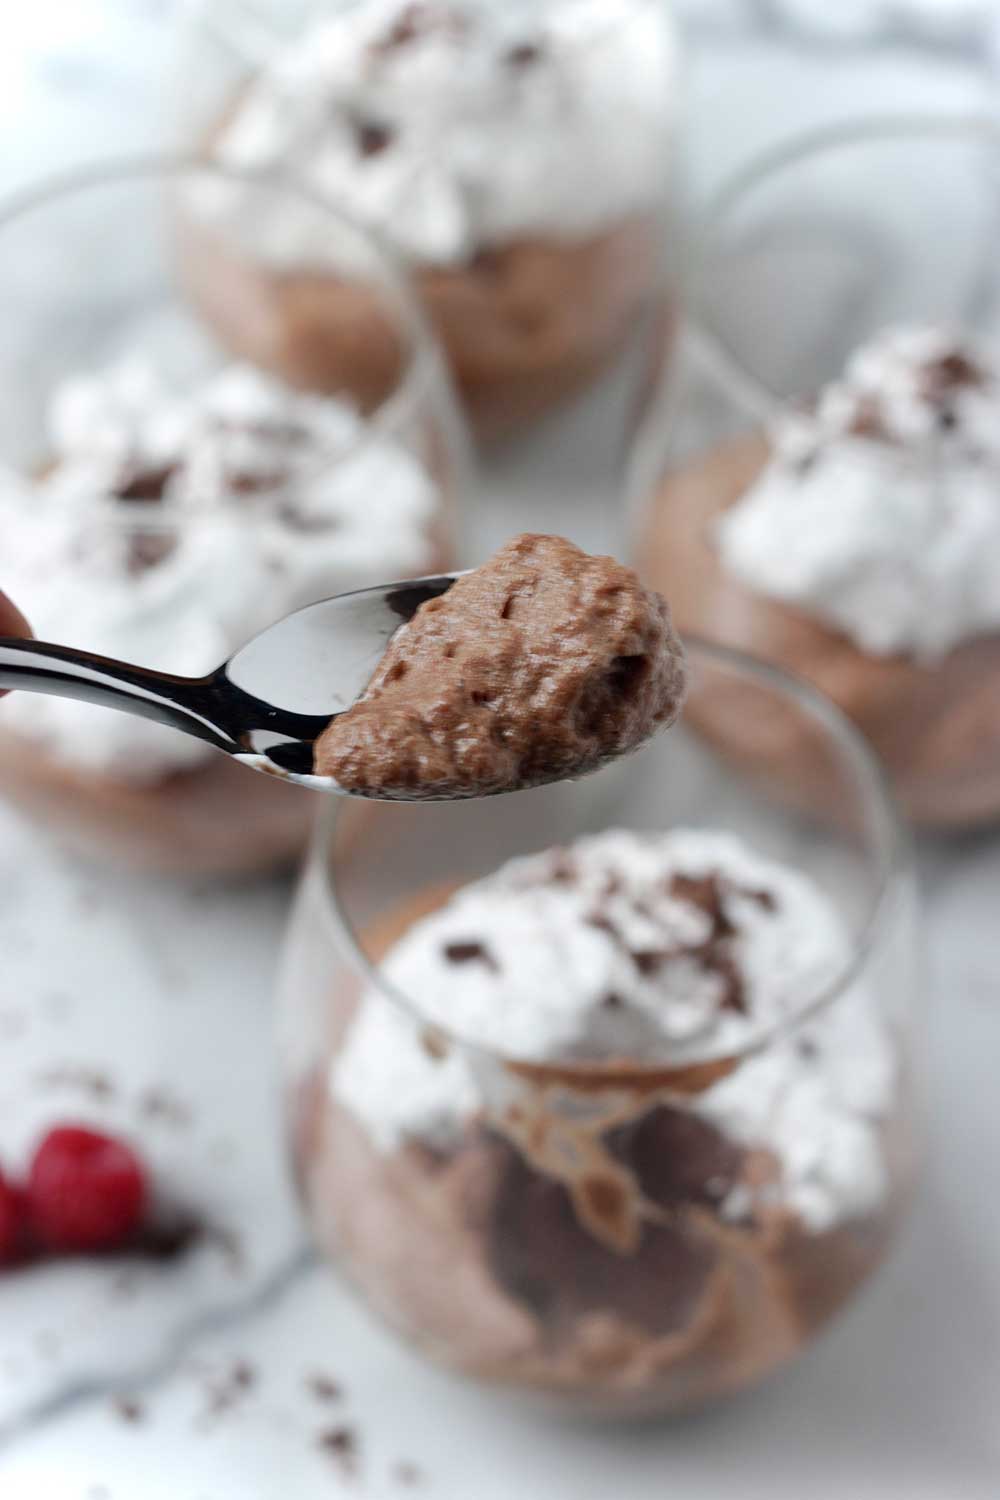 Chocolate mousse on a spoon